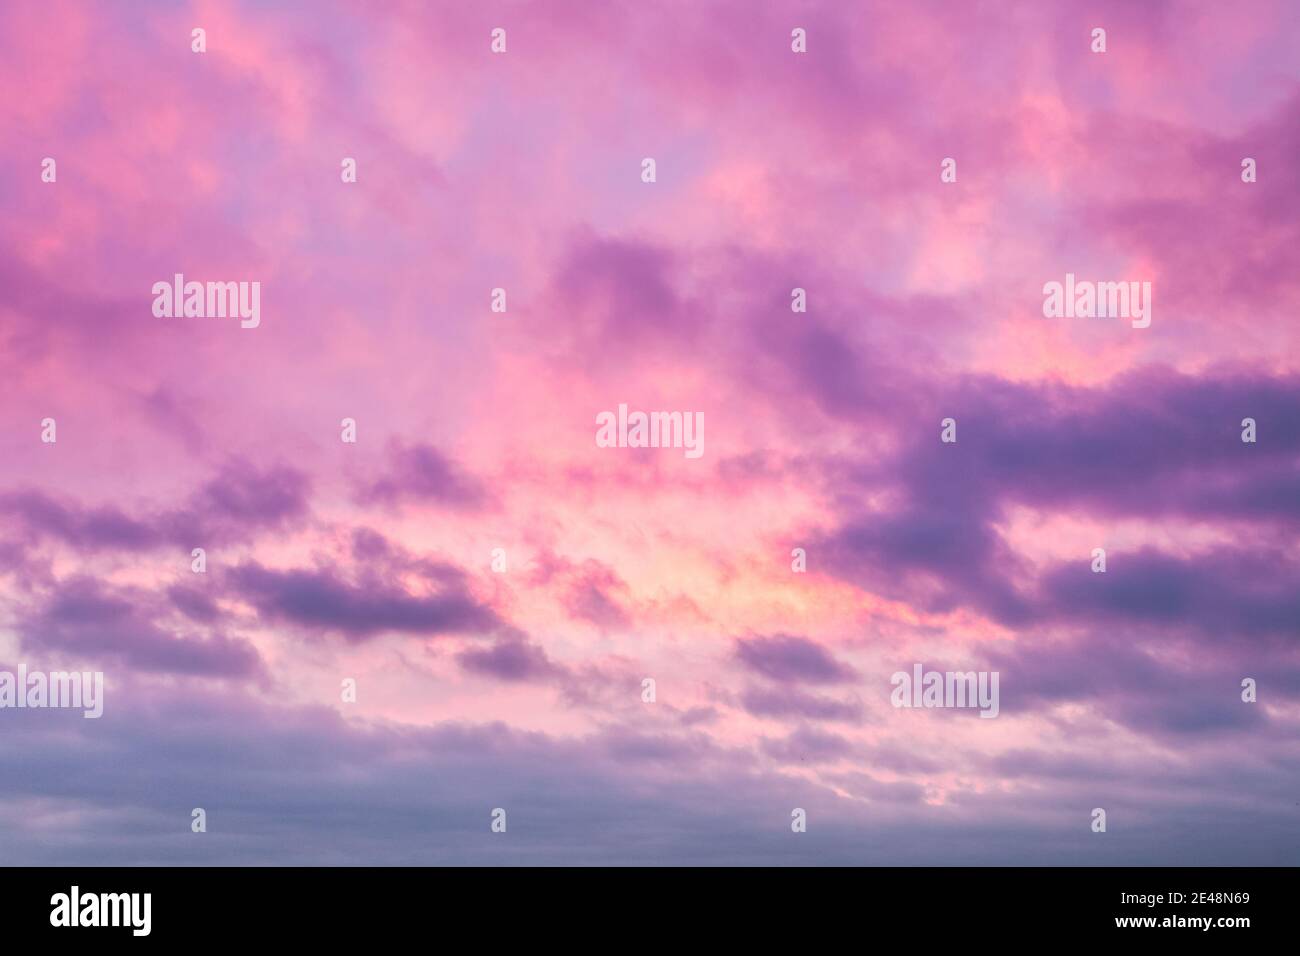 Sunrise clouds skyscape soft pink and purple tones. Majestic summer day cloudy weather. Romantic atmosphere of trendy background illustration desigh in warm pattern. Lovely rose sky panorama shot Stock Photo